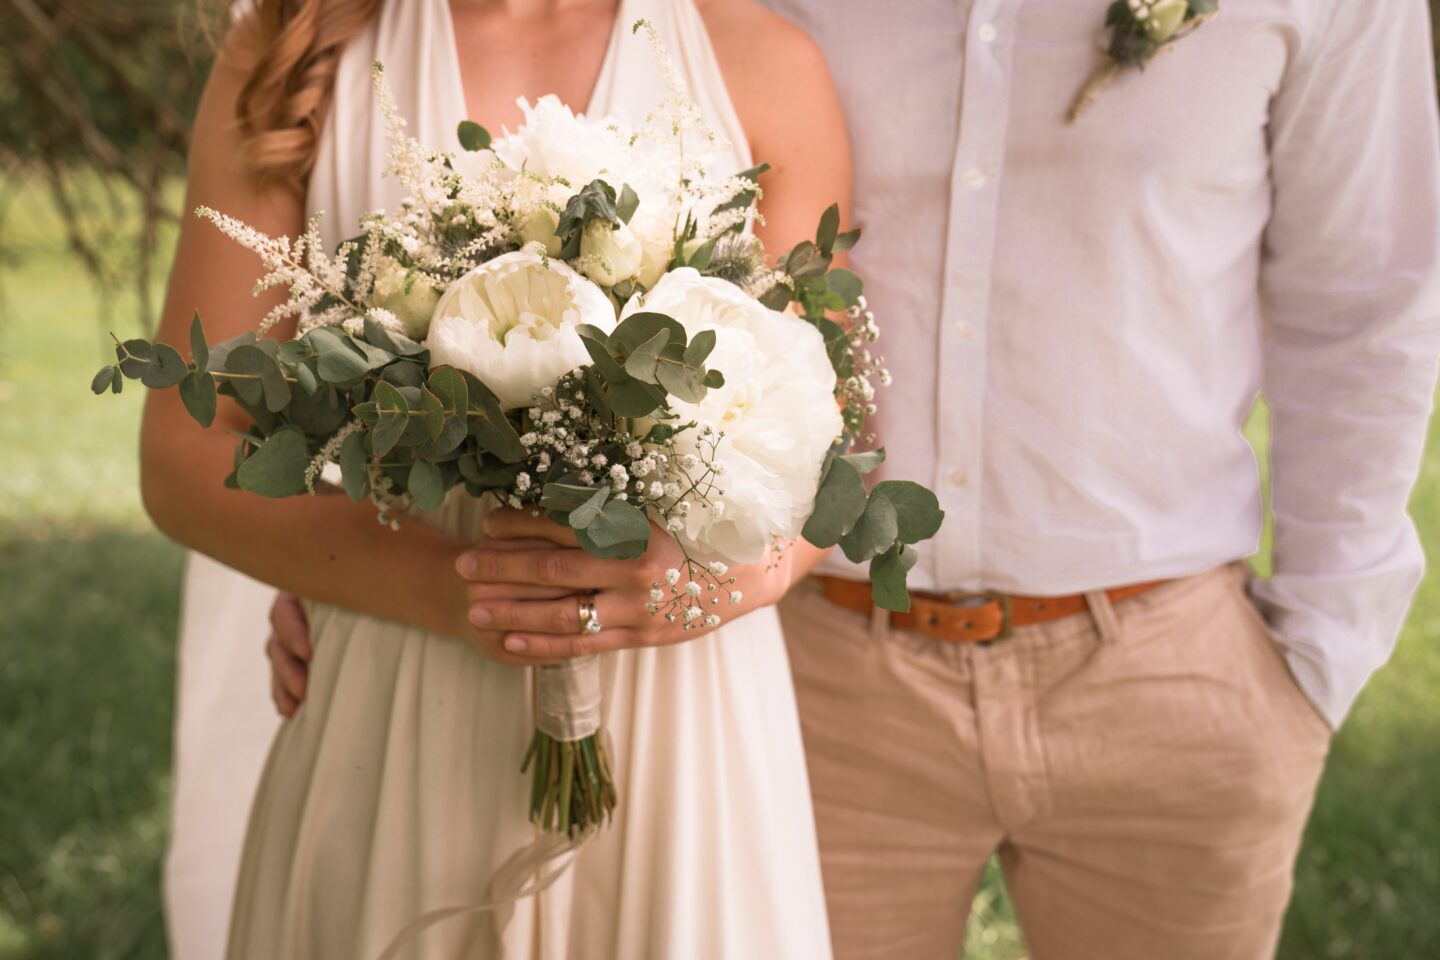 The Best In-Season Spring Wedding Flowers For Your Wedding Day